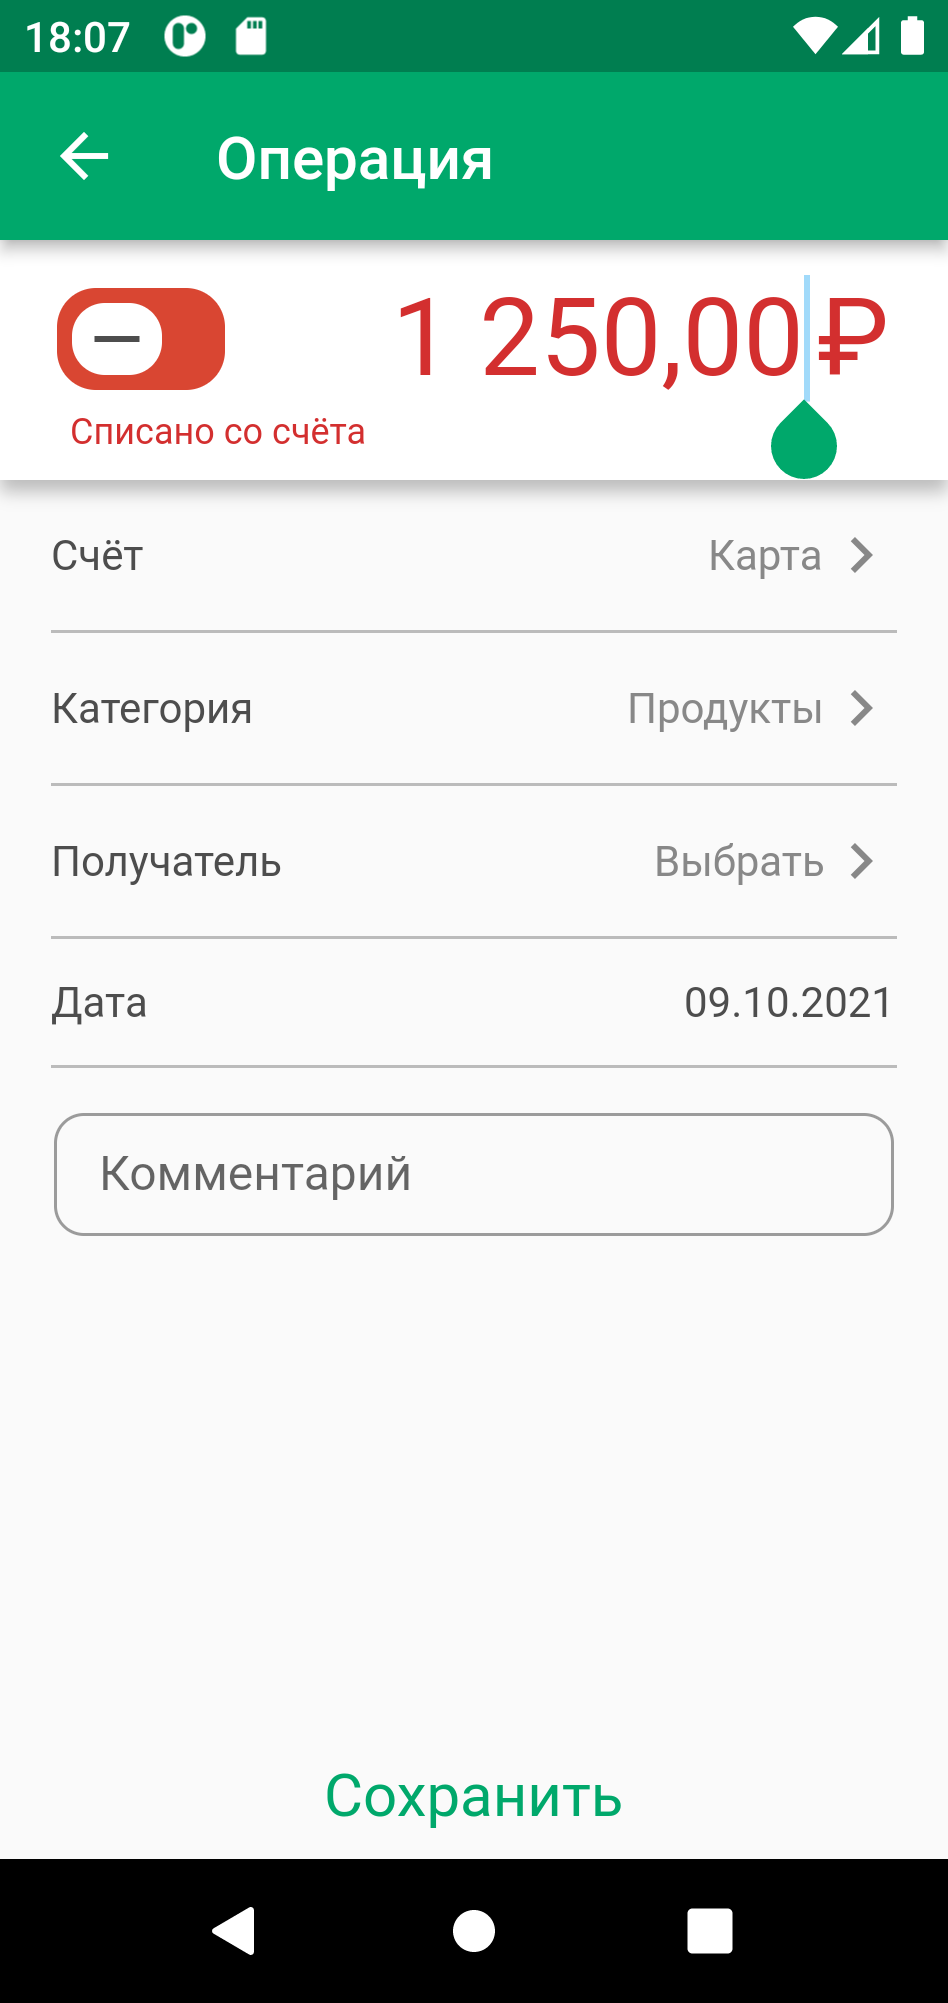 Mobile Plussios, new transaction screen